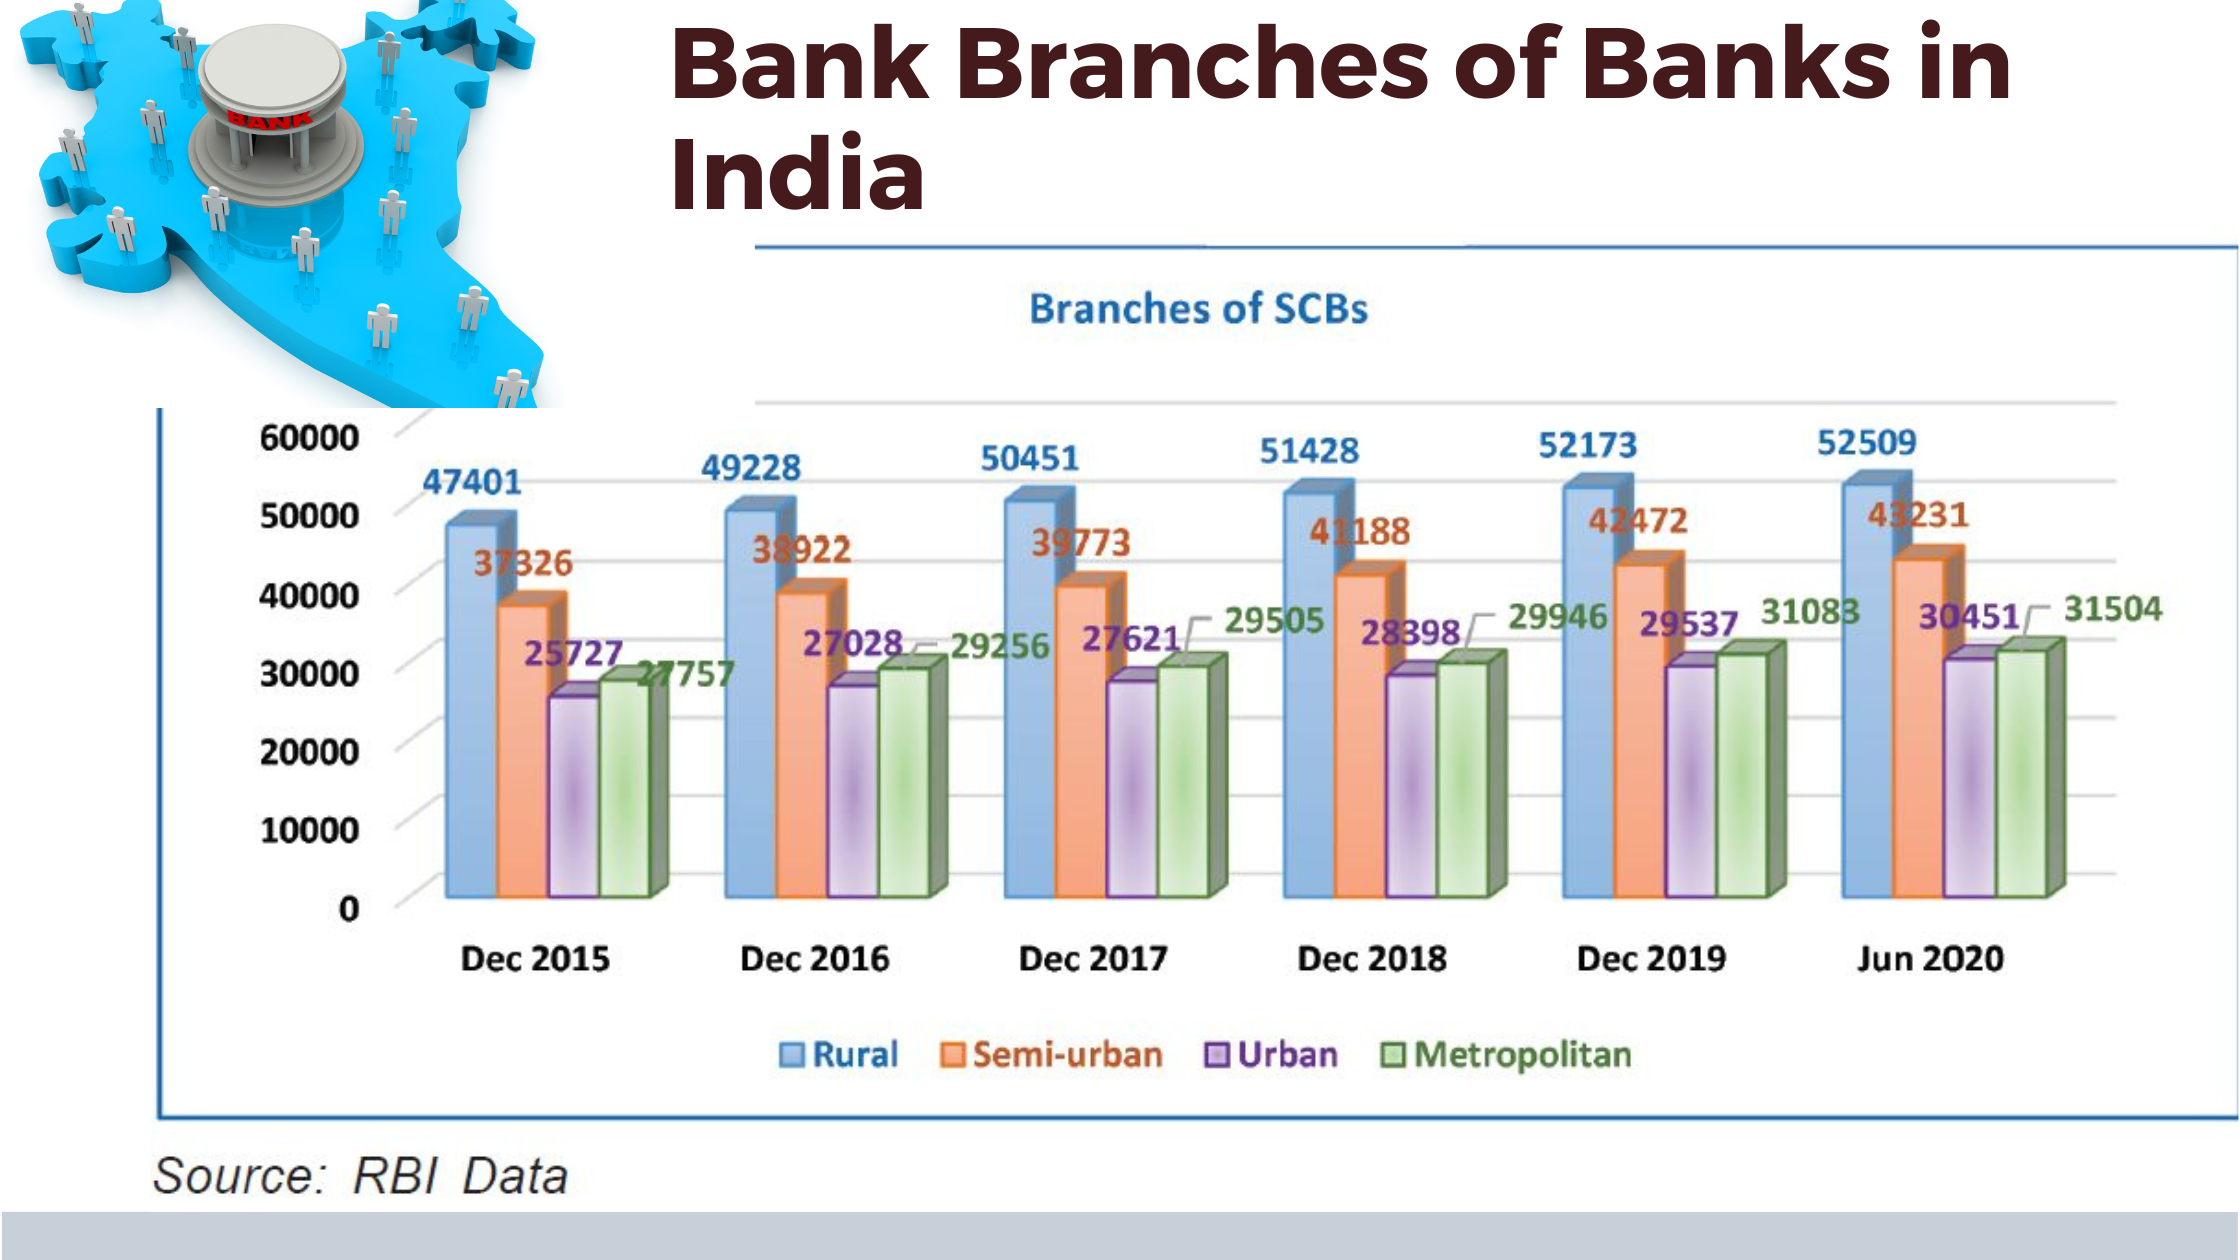 Branches of Schedule Commercial Banks (SCBs) in India